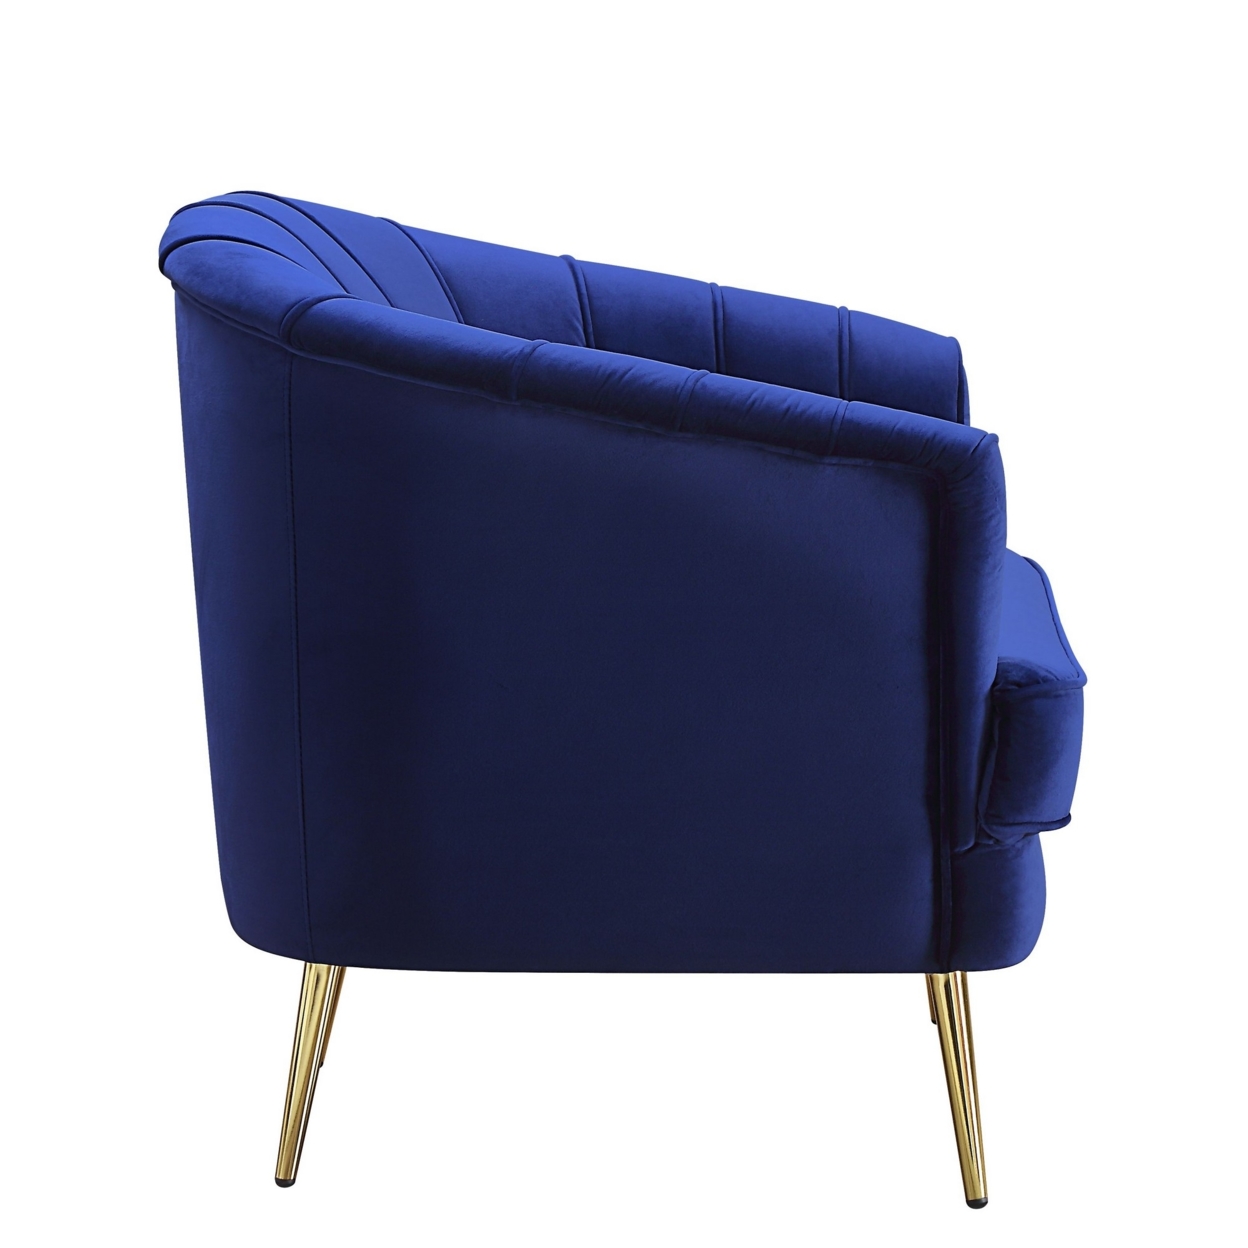 Chair With Vertical Channel Tufting And Sloped Arms, Navy Blue- Saltoro Sherpi